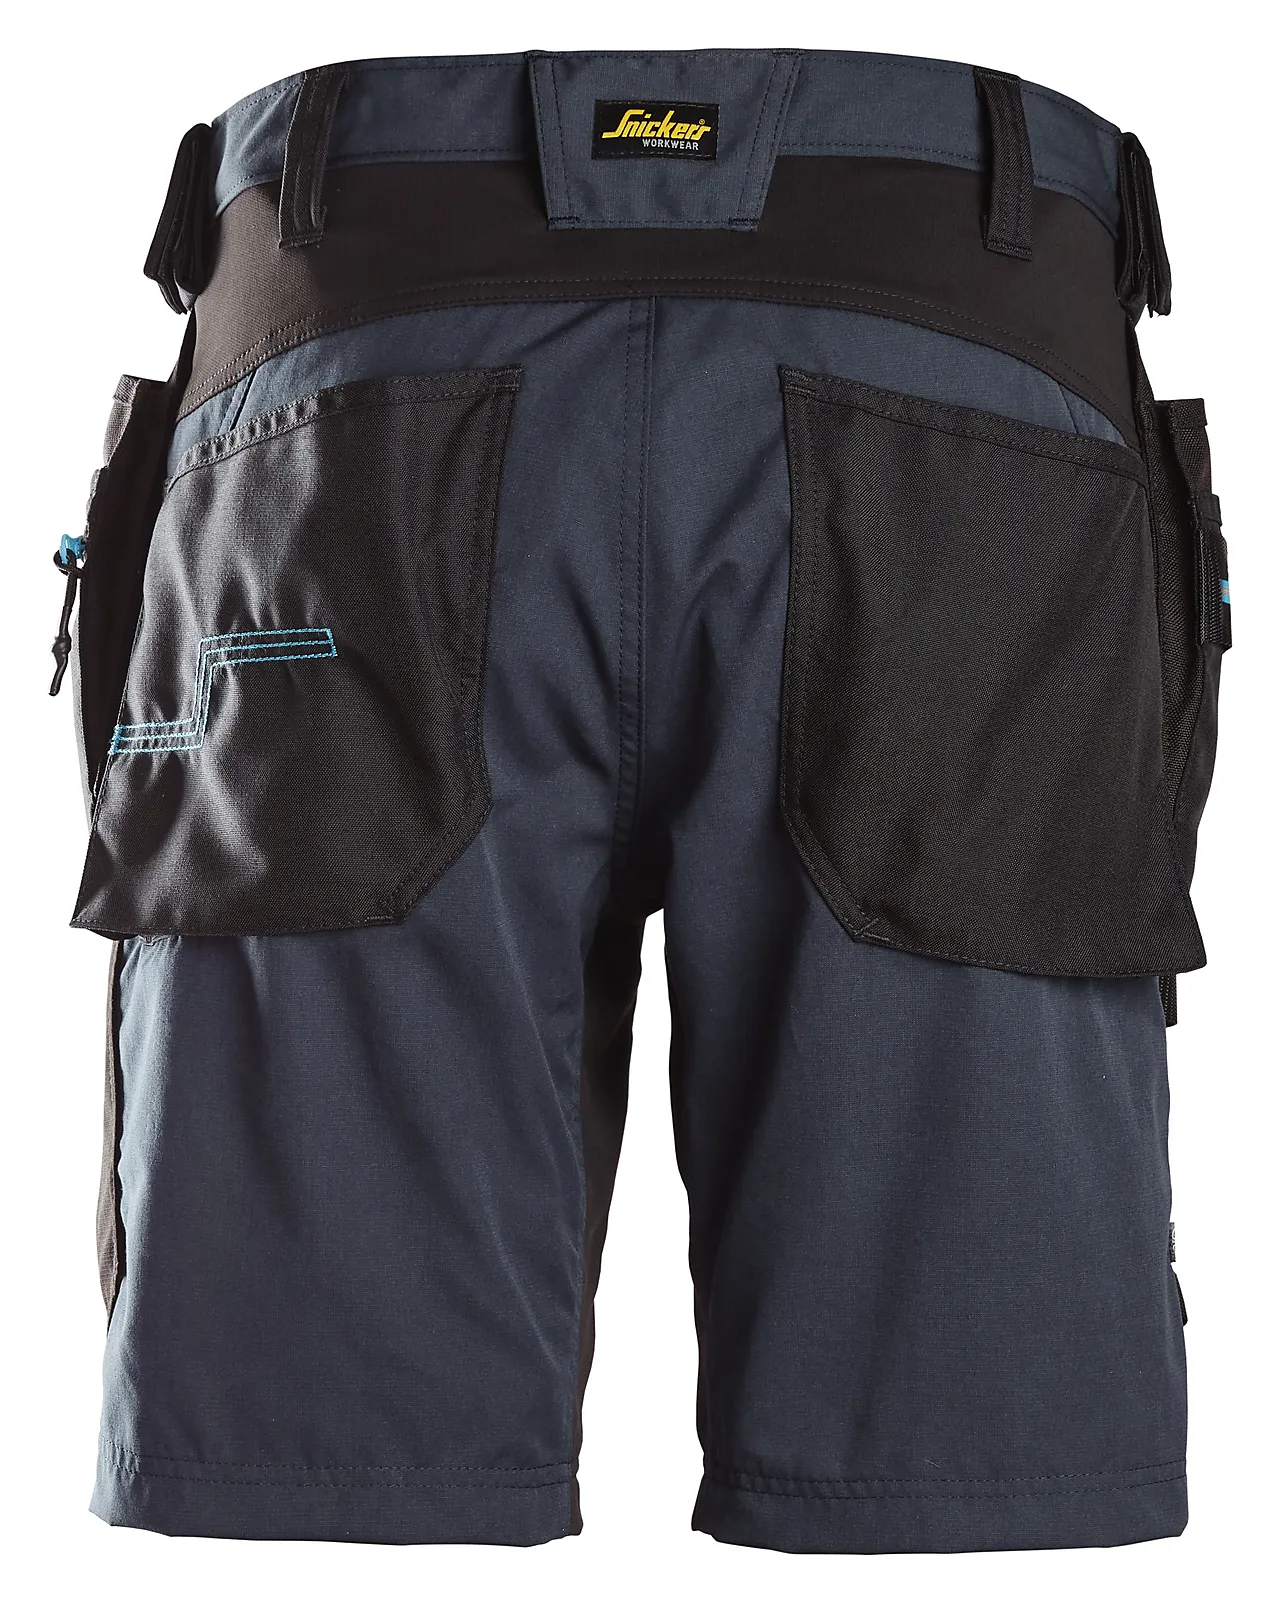 Shorts 6110 mblå/sor hl 70 snickers workwear null - null - 3 - Miniatyr